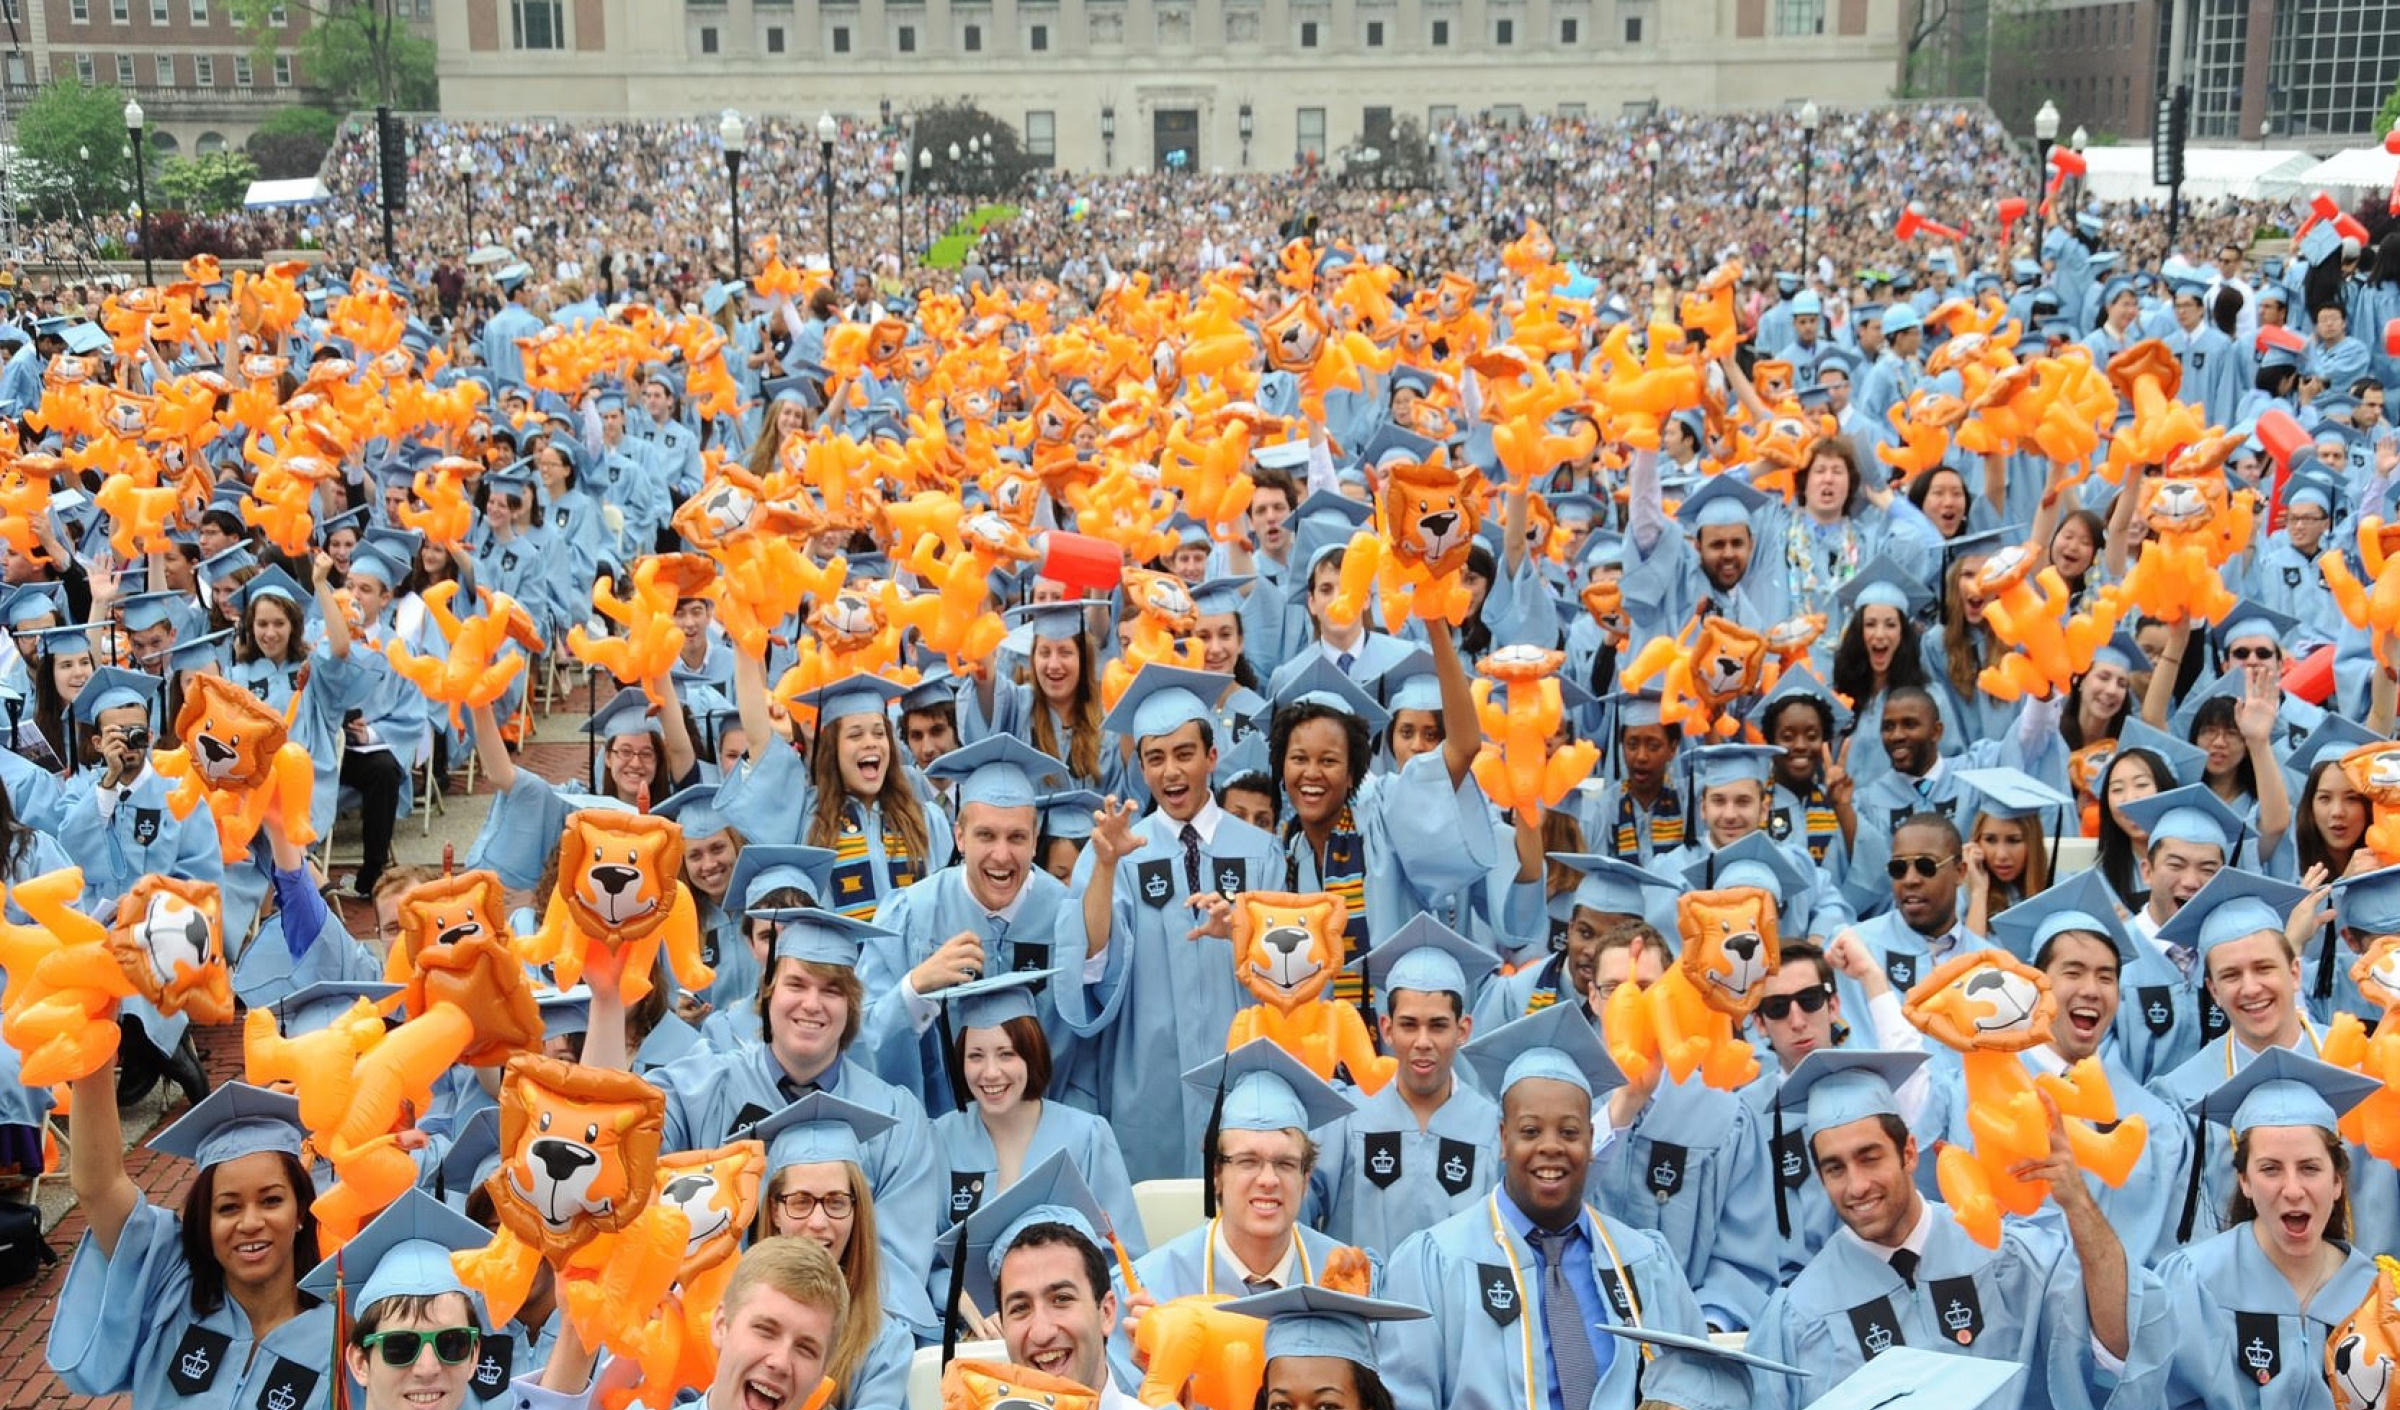 A sea of Columbia students in blue robes with inflatable lions during Commencement